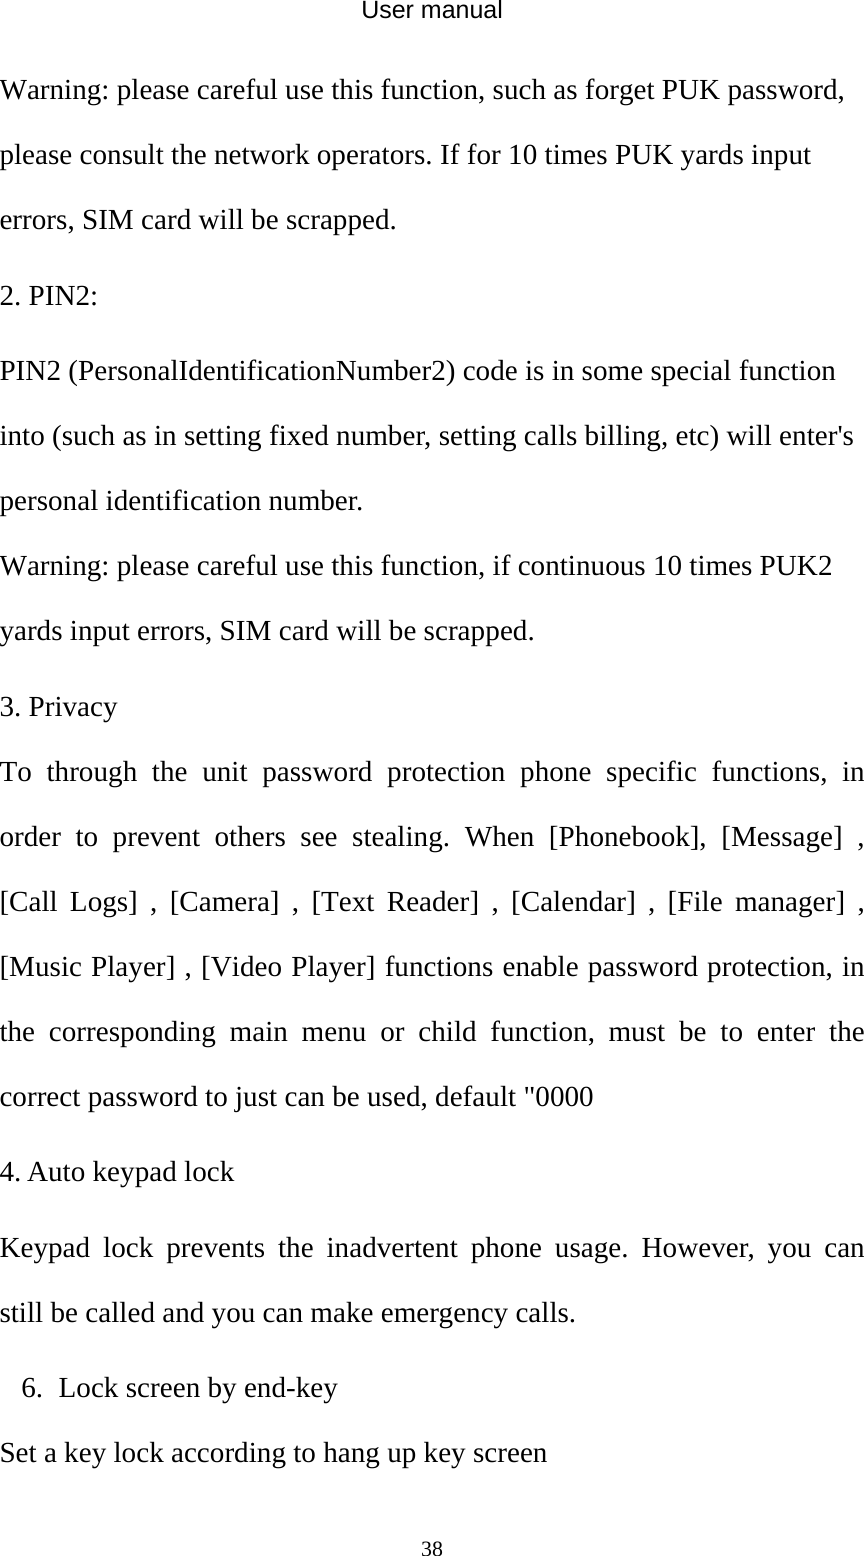 User manual  38Warning: please careful use this function, such as forget PUK password, please consult the network operators. If for 10 times PUK yards input errors, SIM card will be scrapped. 2. PIN2: PIN2 (PersonalIdentificationNumber2) code is in some special function into (such as in setting fixed number, setting calls billing, etc) will enter&apos;s personal identification number. Warning: please careful use this function, if continuous 10 times PUK2 yards input errors, SIM card will be scrapped. 3. Privacy To through the unit password protection phone specific functions, in order to prevent others see stealing. When [Phonebook], [Message] , [Call Logs] , [Camera] , [Text Reader] , [Calendar] , [File manager] , [Music Player] , [Video Player] functions enable password protection, in the corresponding main menu or child function, must be to enter the correct password to just can be used, default &quot;0000 4. Auto keypad lock Keypad lock prevents the inadvertent phone usage. However, you can still be called and you can make emergency calls. 6. Lock screen by end-key Set a key lock according to hang up key screen 